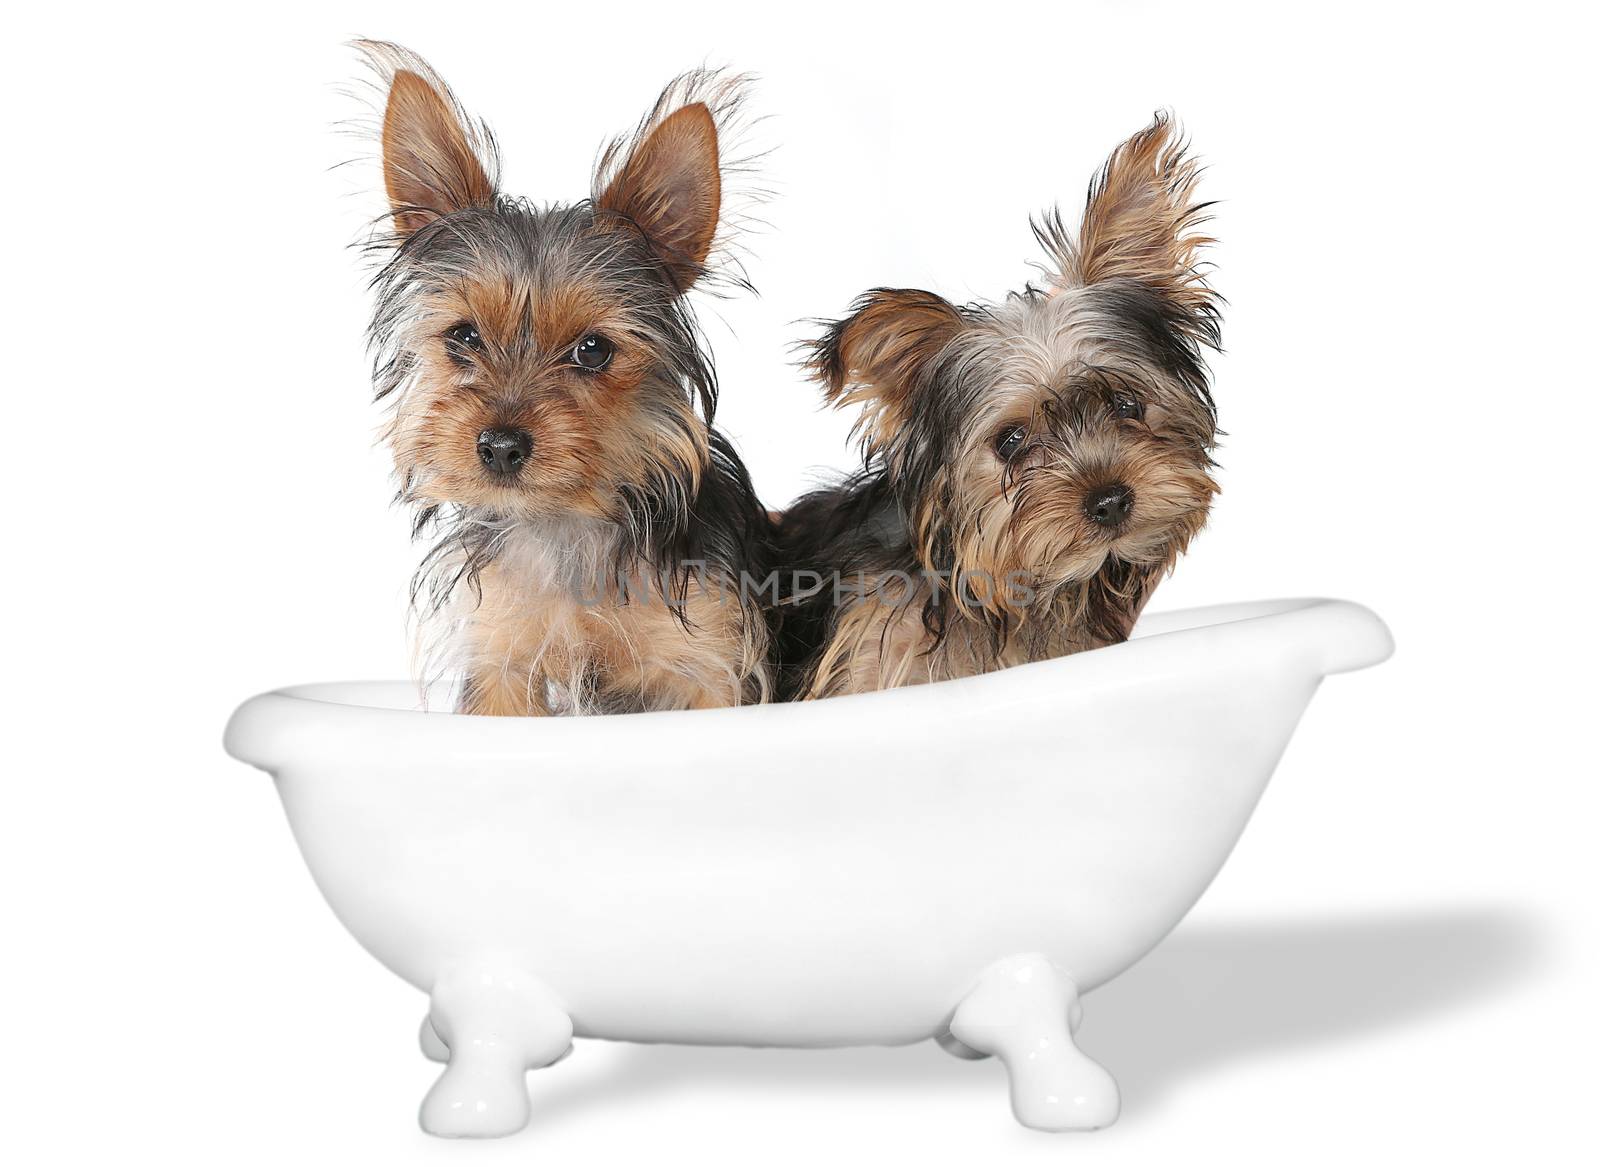 Teacup Yorkshire Terriers on White Bathing by tobkatrina